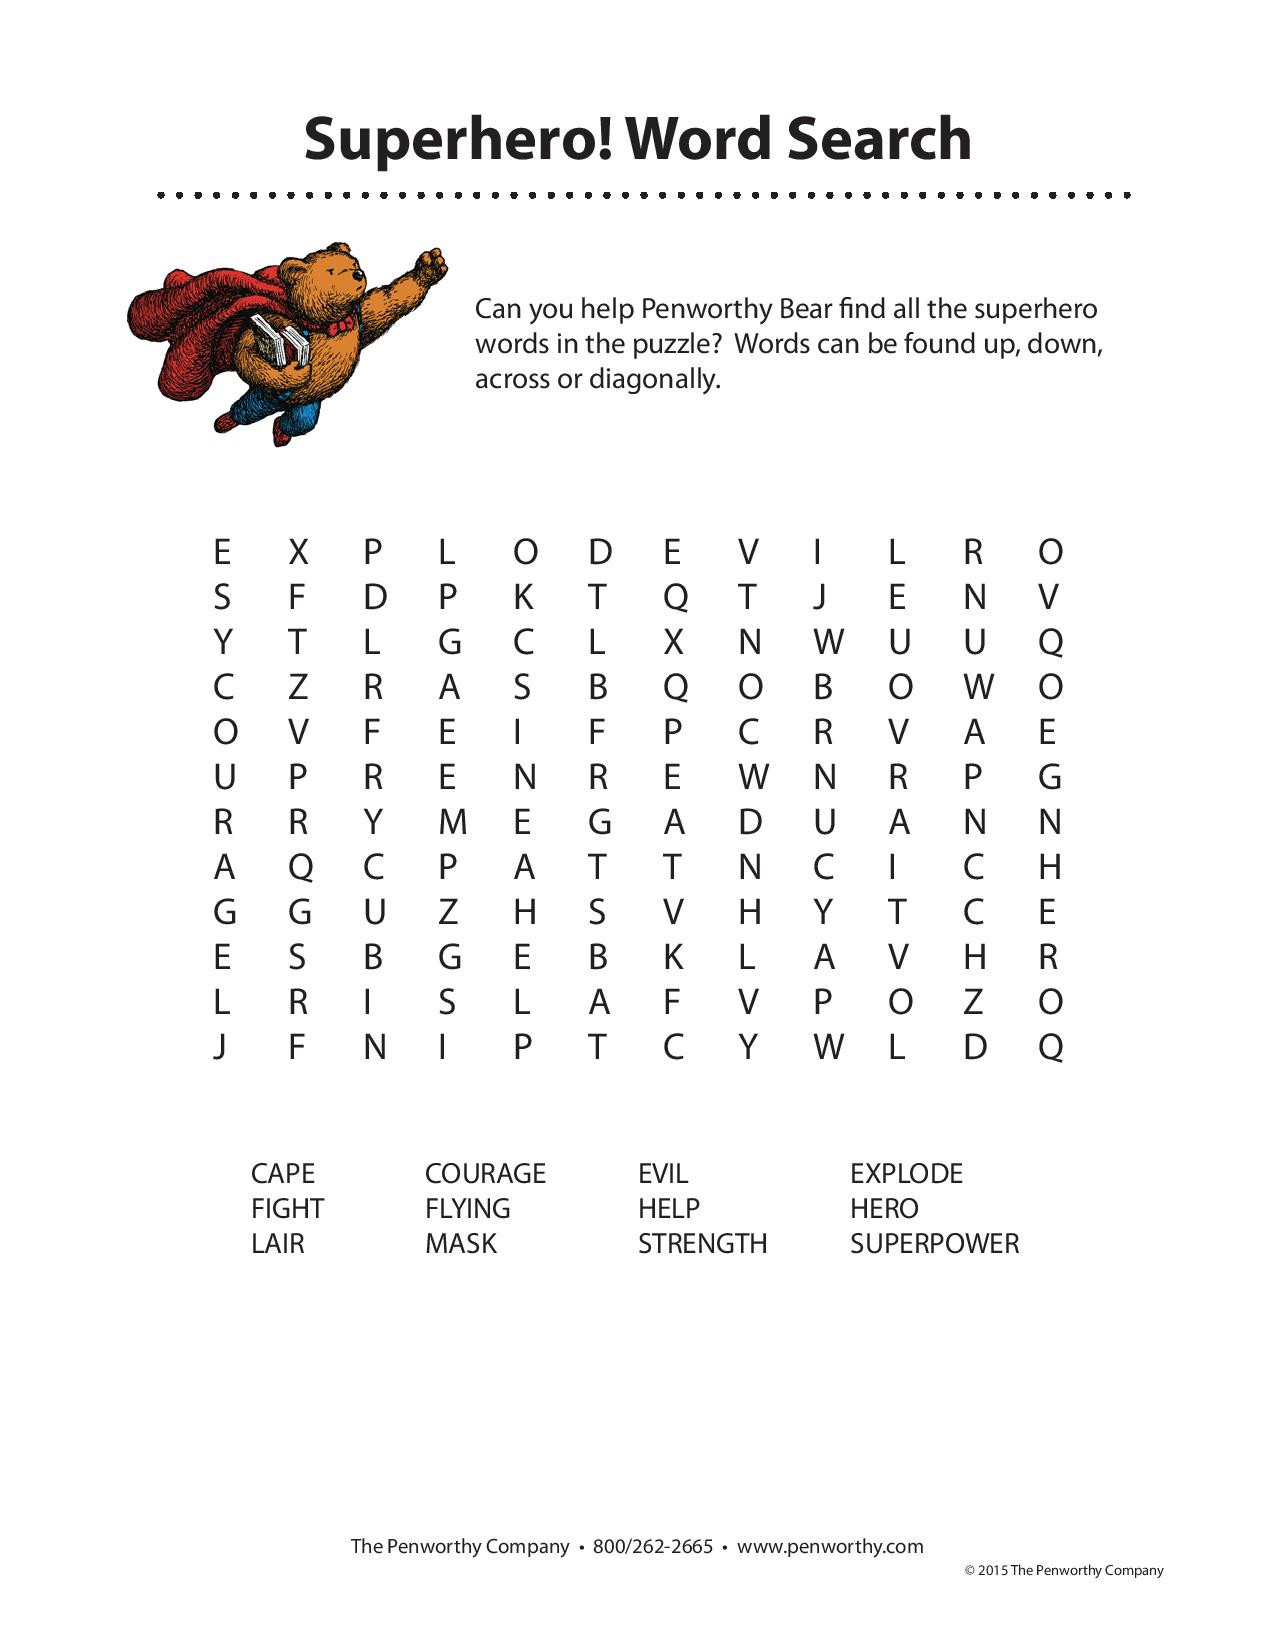 Superhero Word Search Printable 10 Superheroes Word Search Printables for All